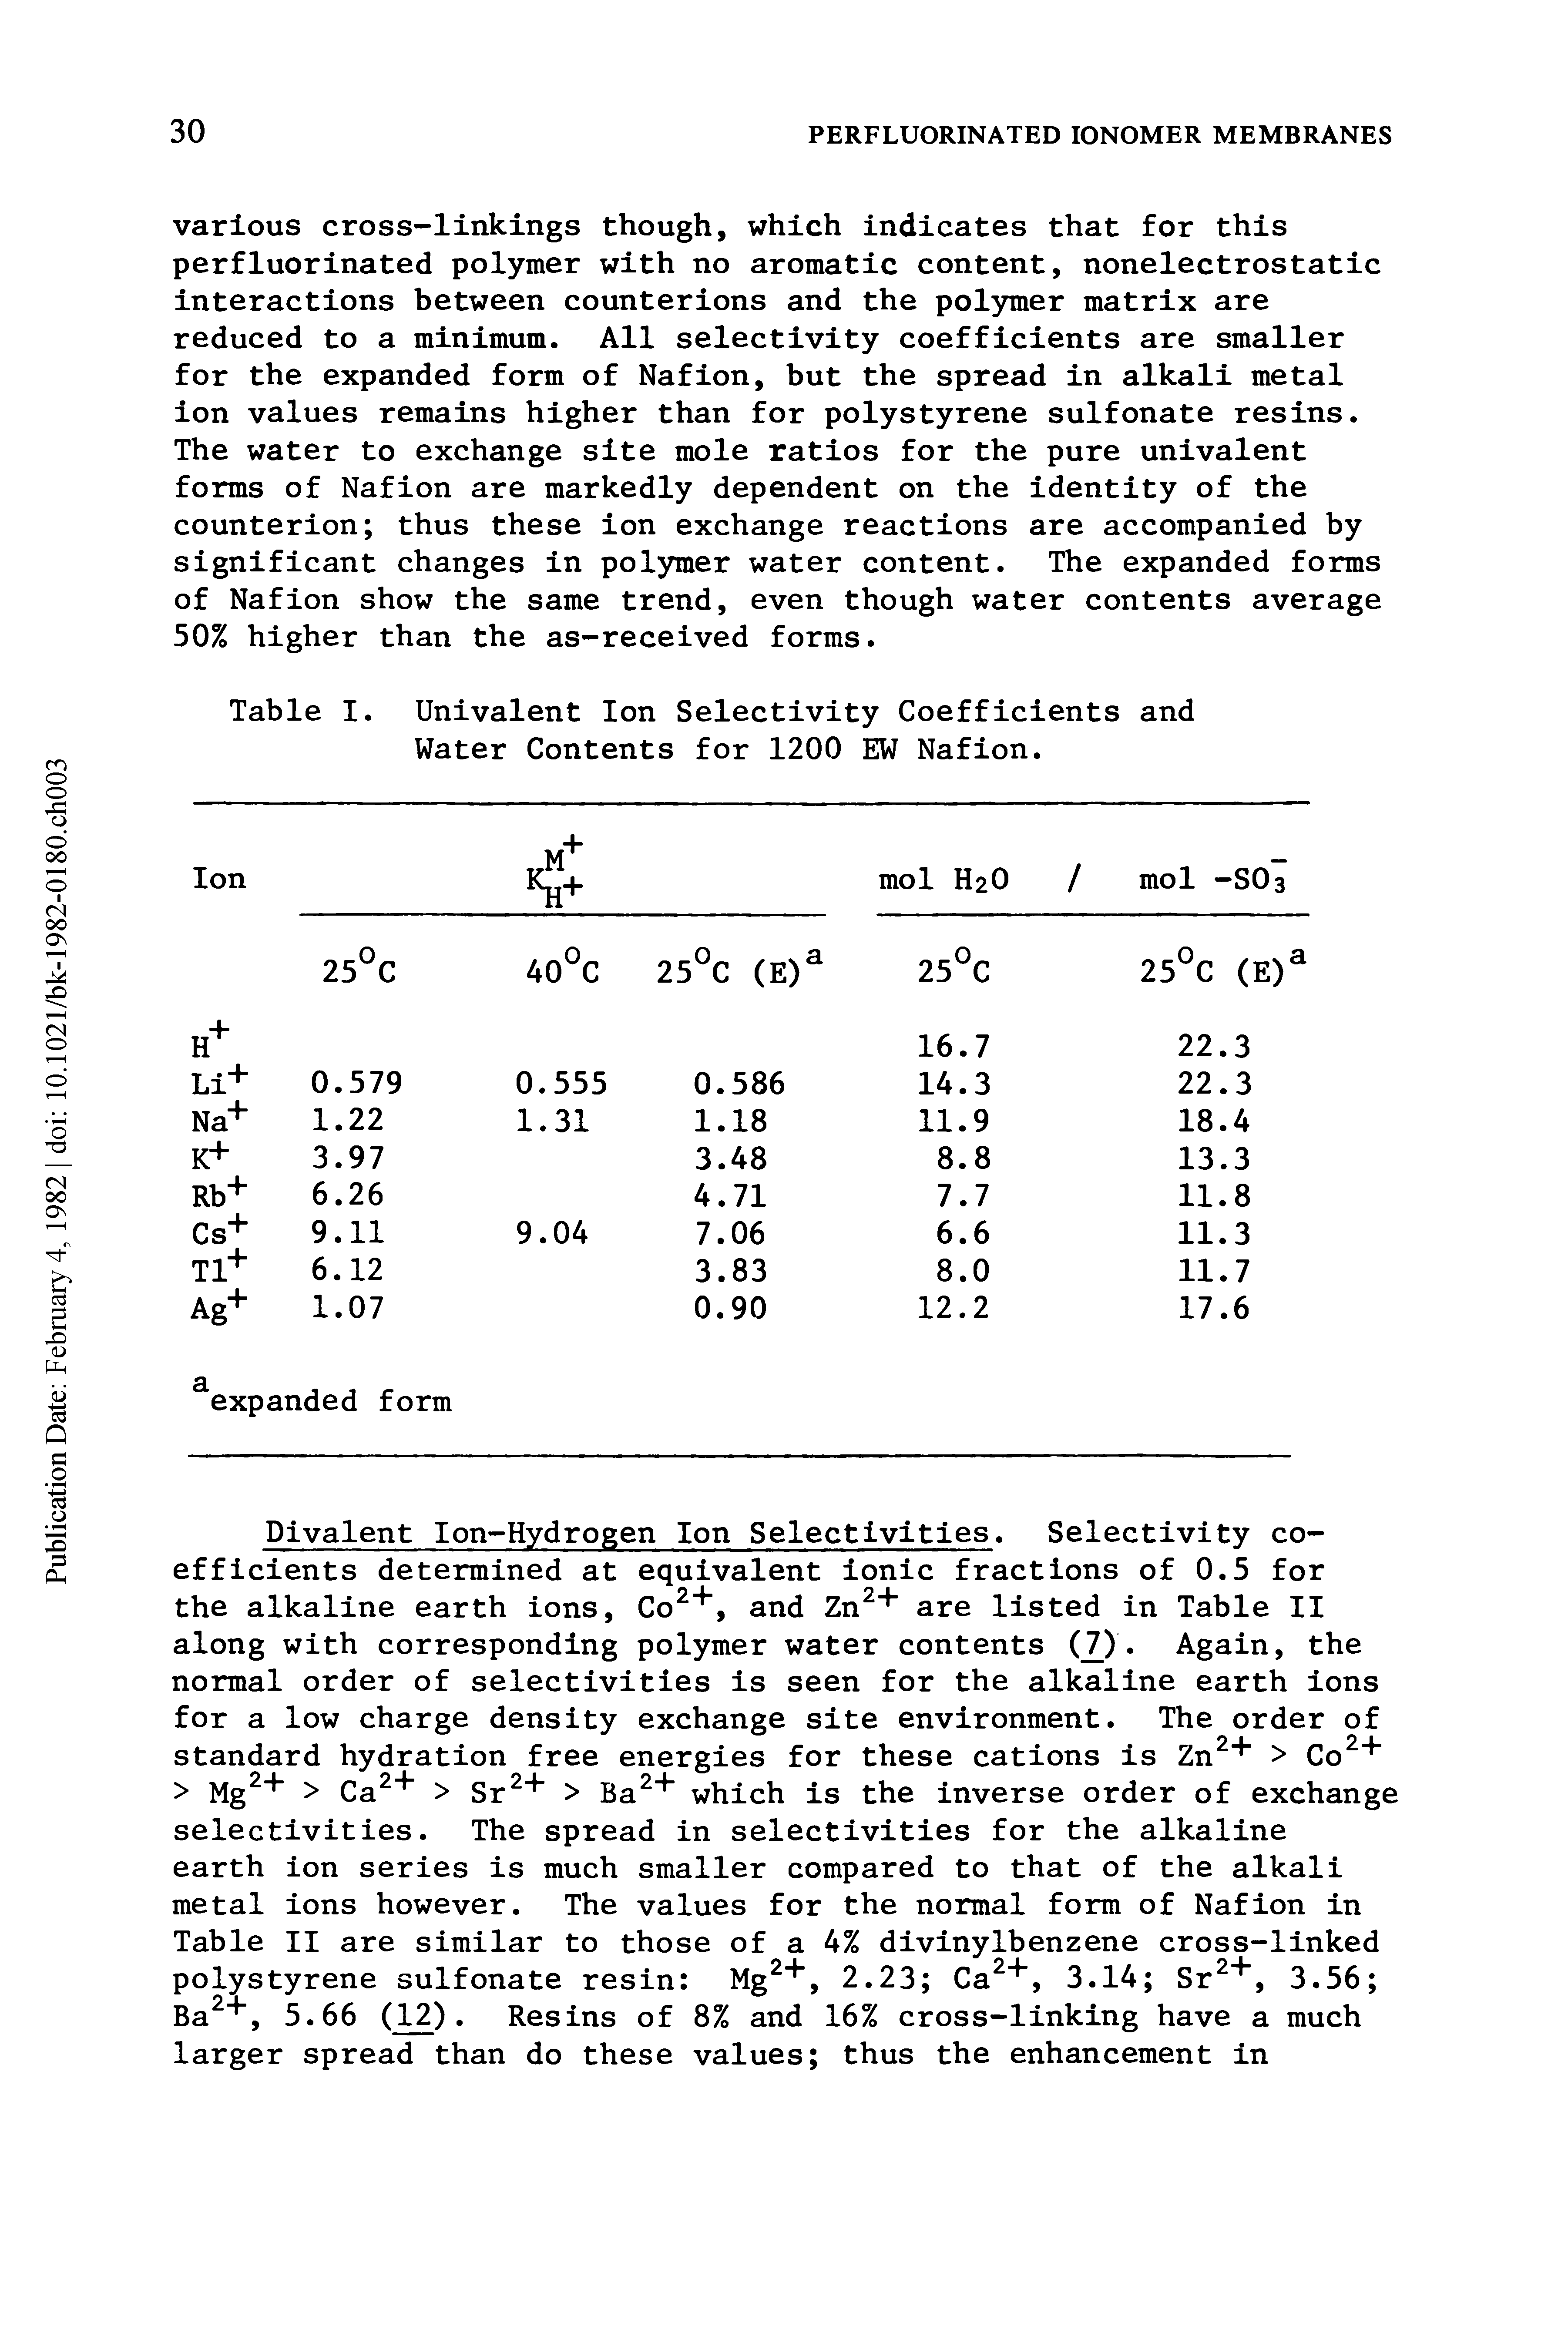 Table I. Univalent Ion Selectivity Coefficients and Water Contents for 1200 EW Nafion.